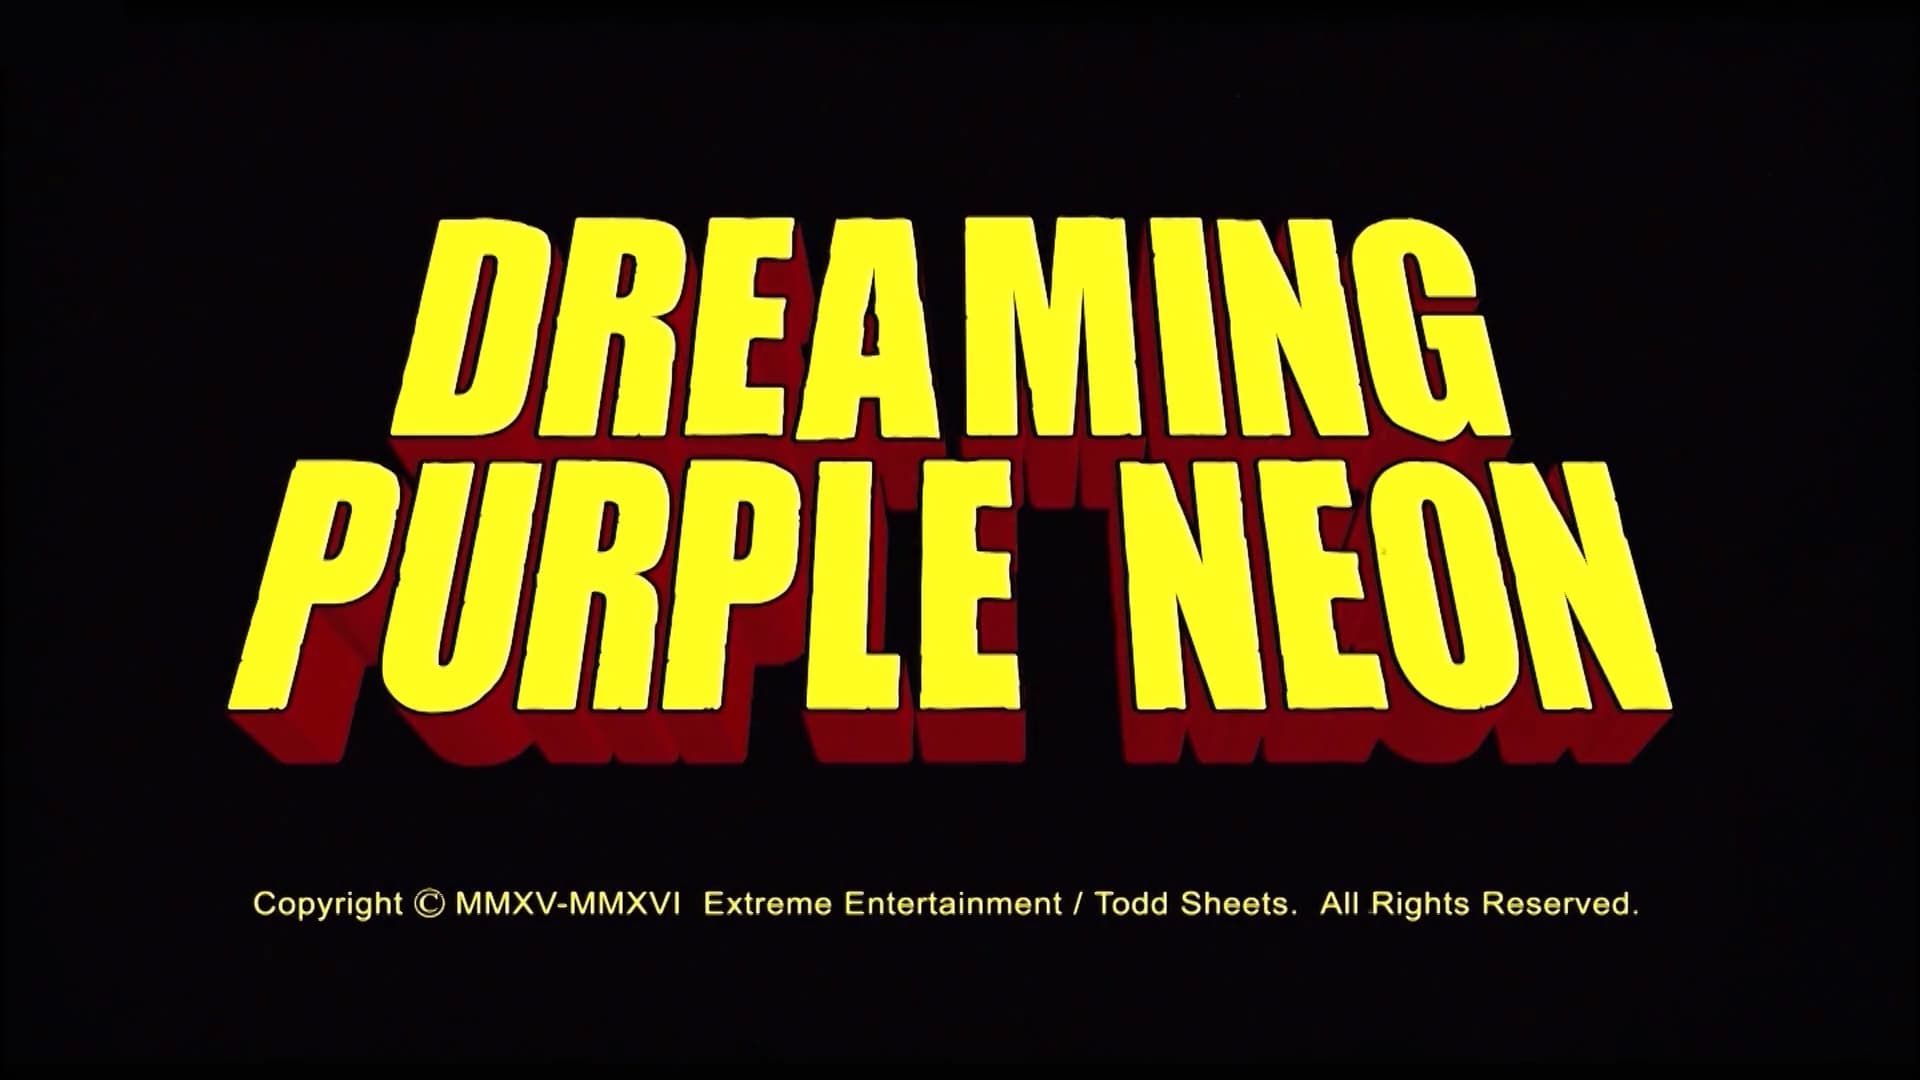 Dreaming Purple Neon background